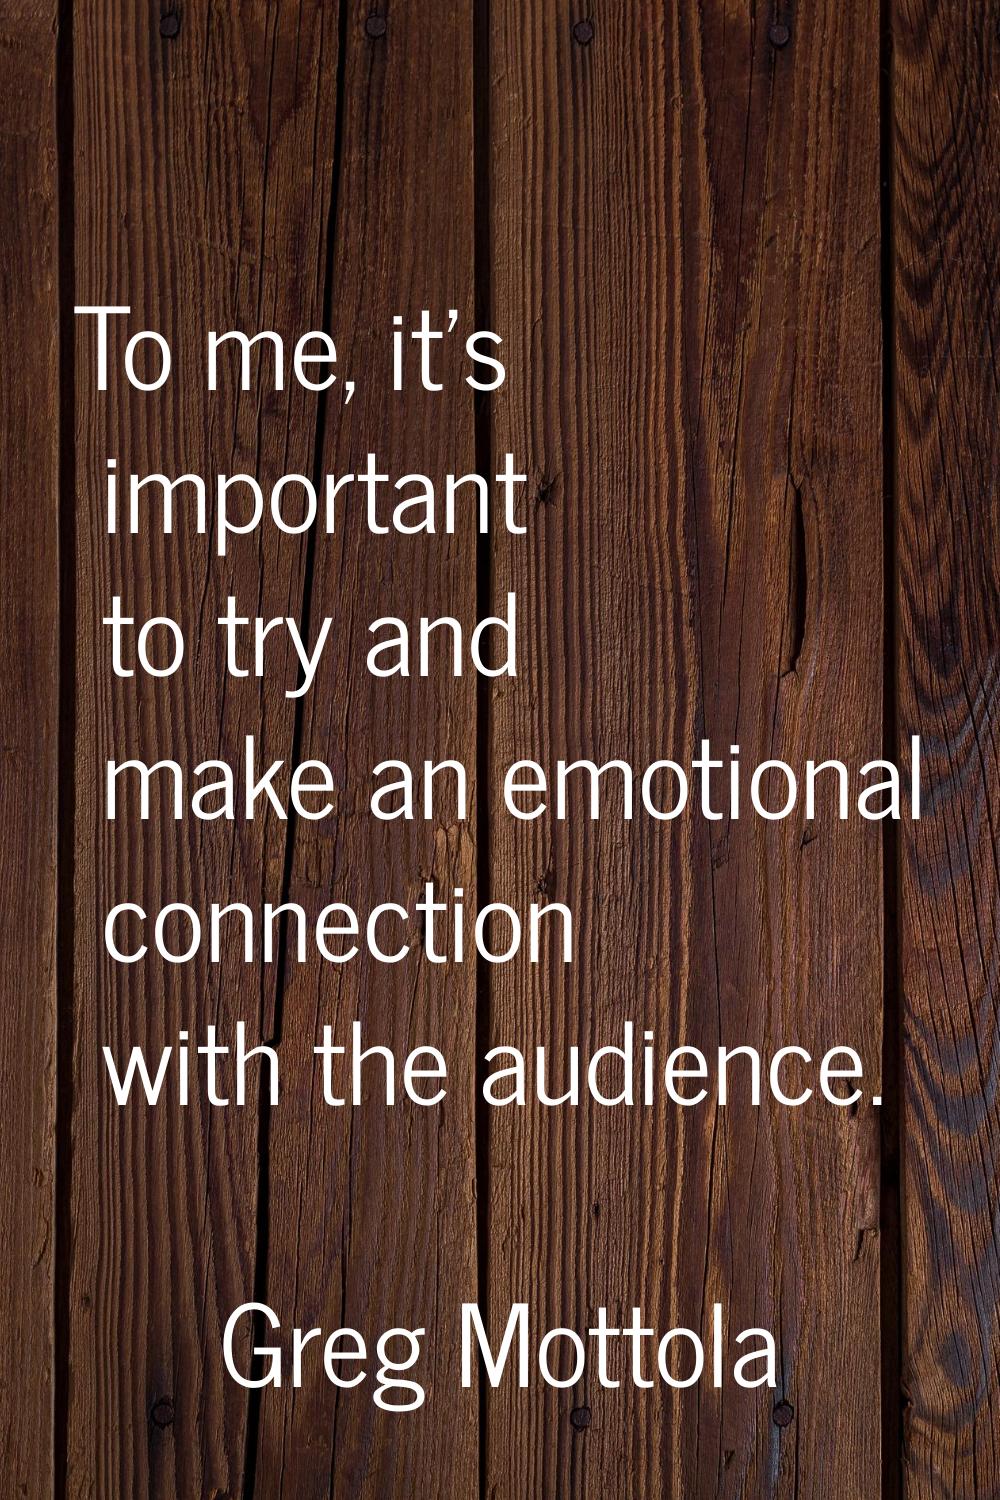 To me, it's important to try and make an emotional connection with the audience.